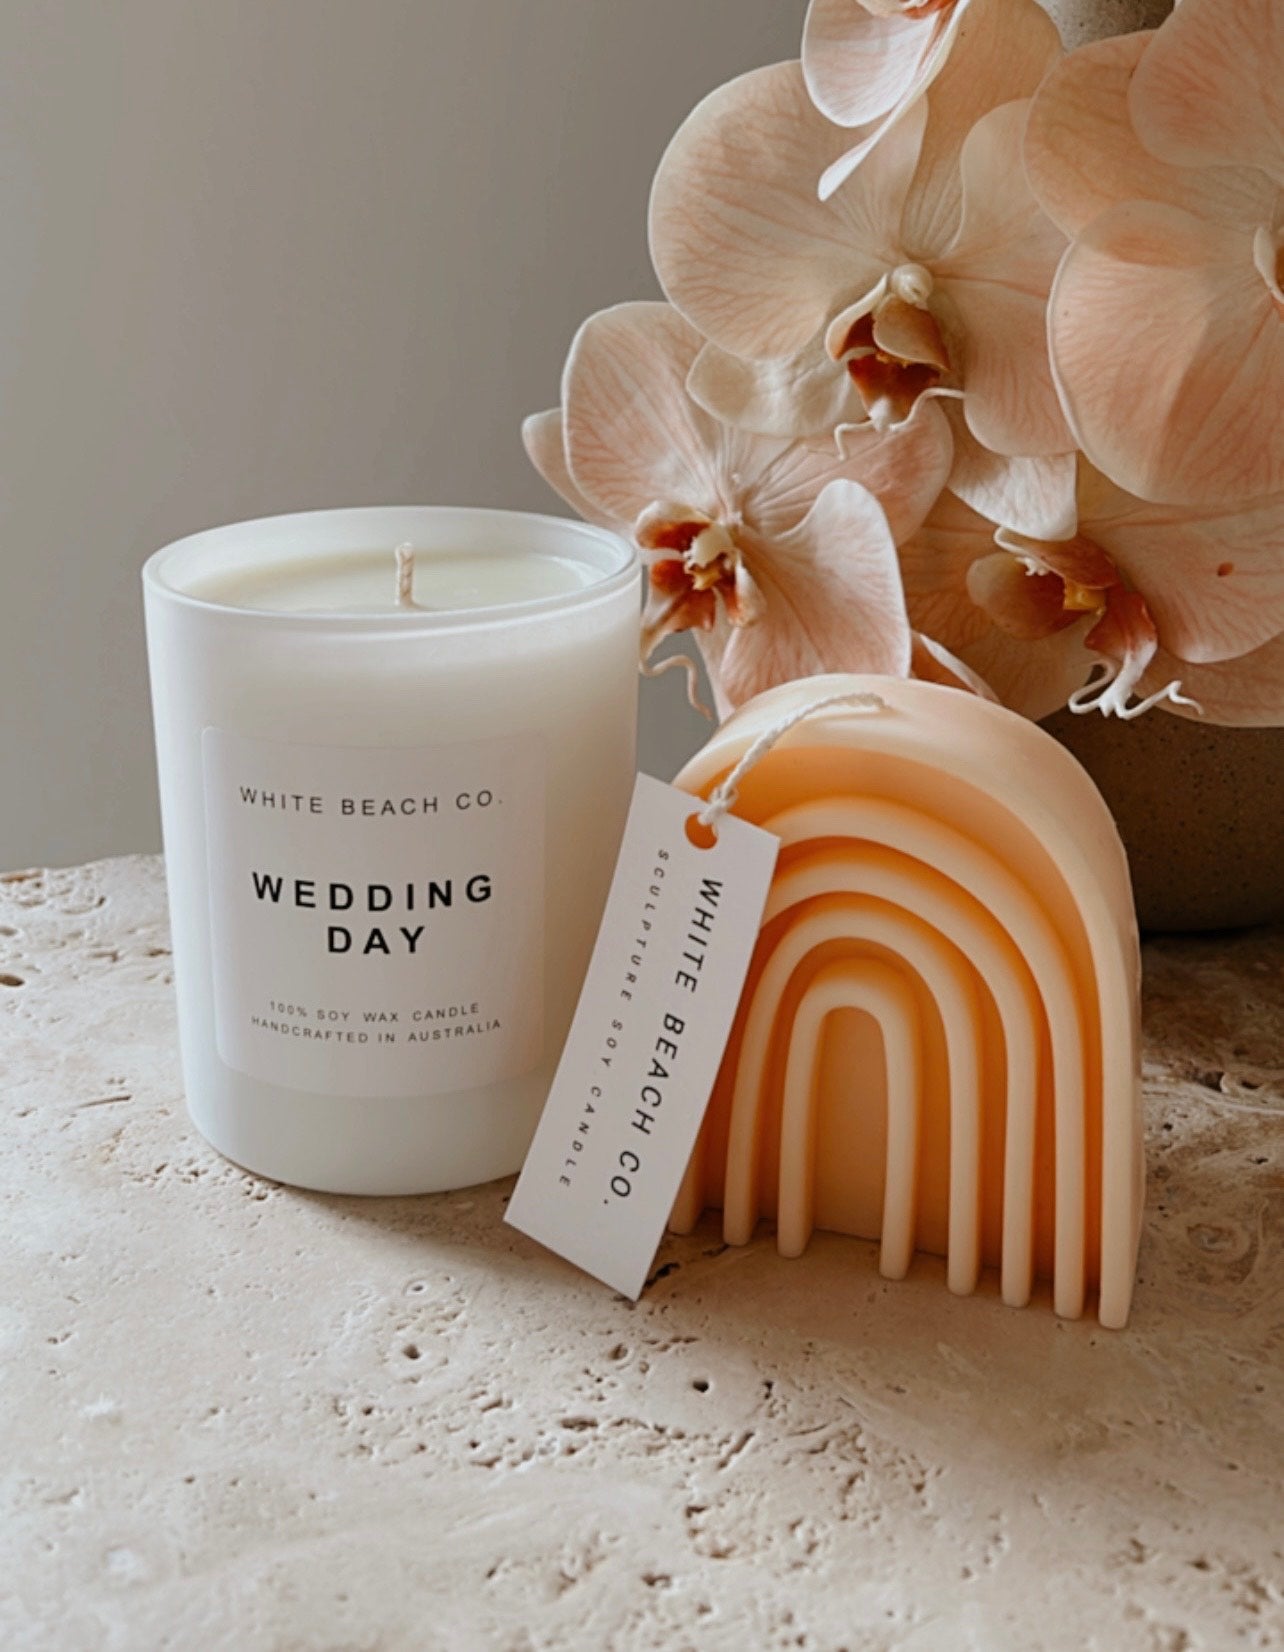 Wedding Day Special occasion candle by White Beach Co.